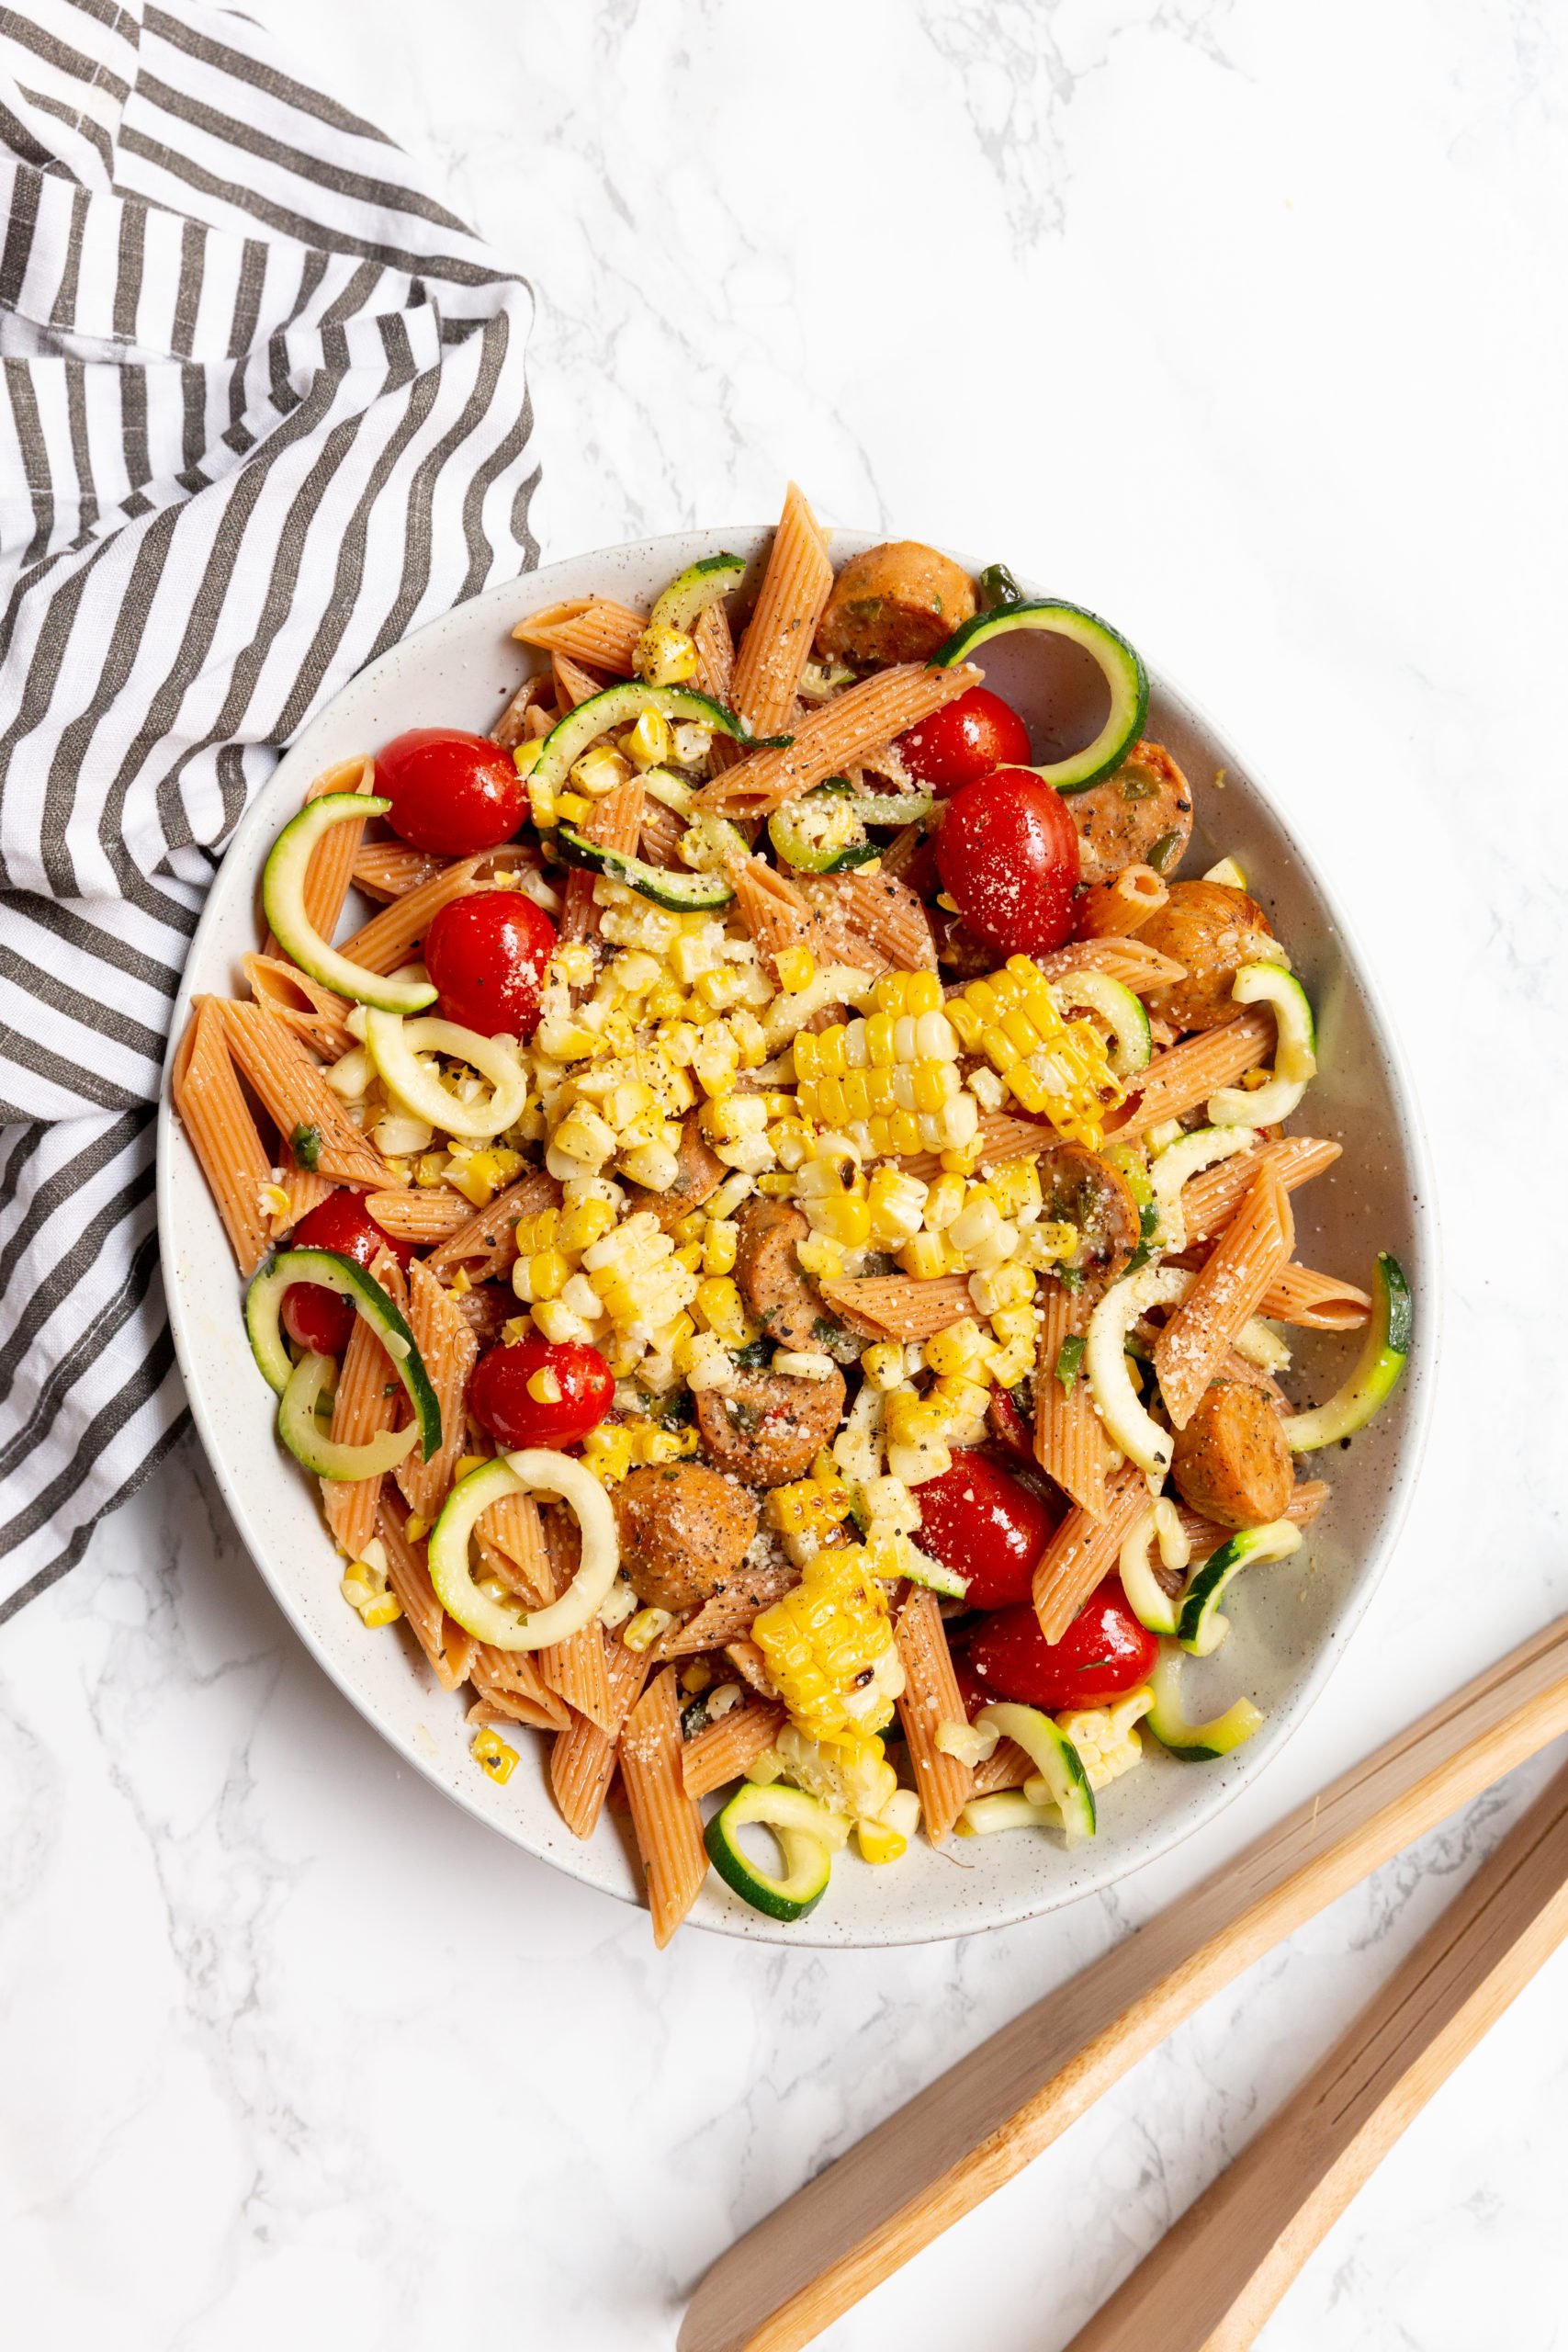 Zucchini and Grilled Corn Pasta with Chicken Sausage and Garlic-Basil Dressing